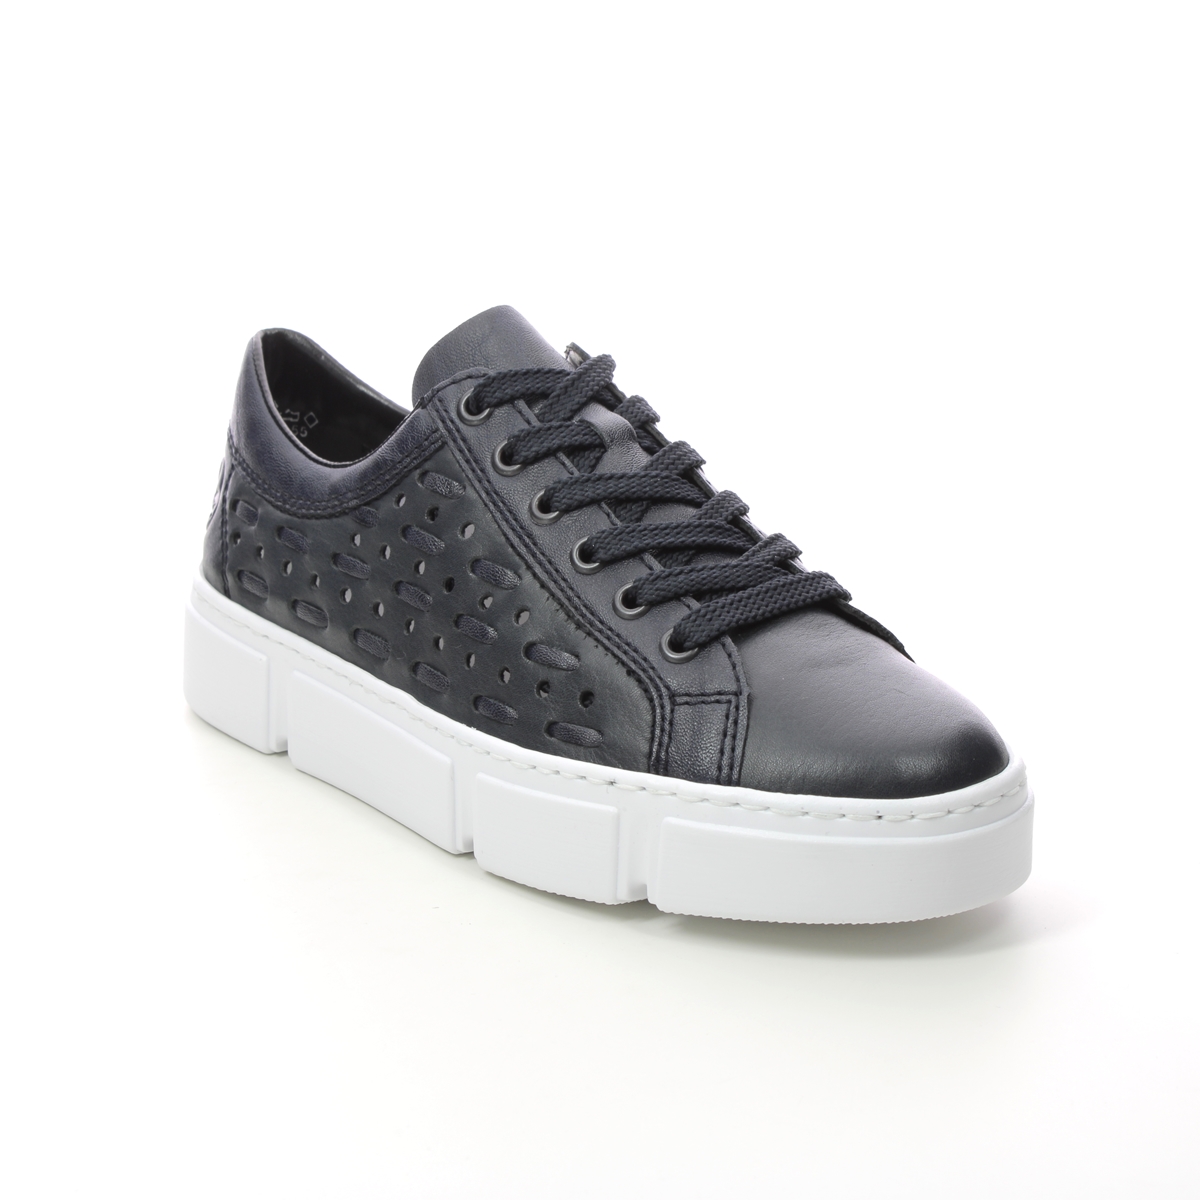 Rieker Hagen Navy Leather Womens Trainers N5918-14 In Size 40 In Plain Navy Leather